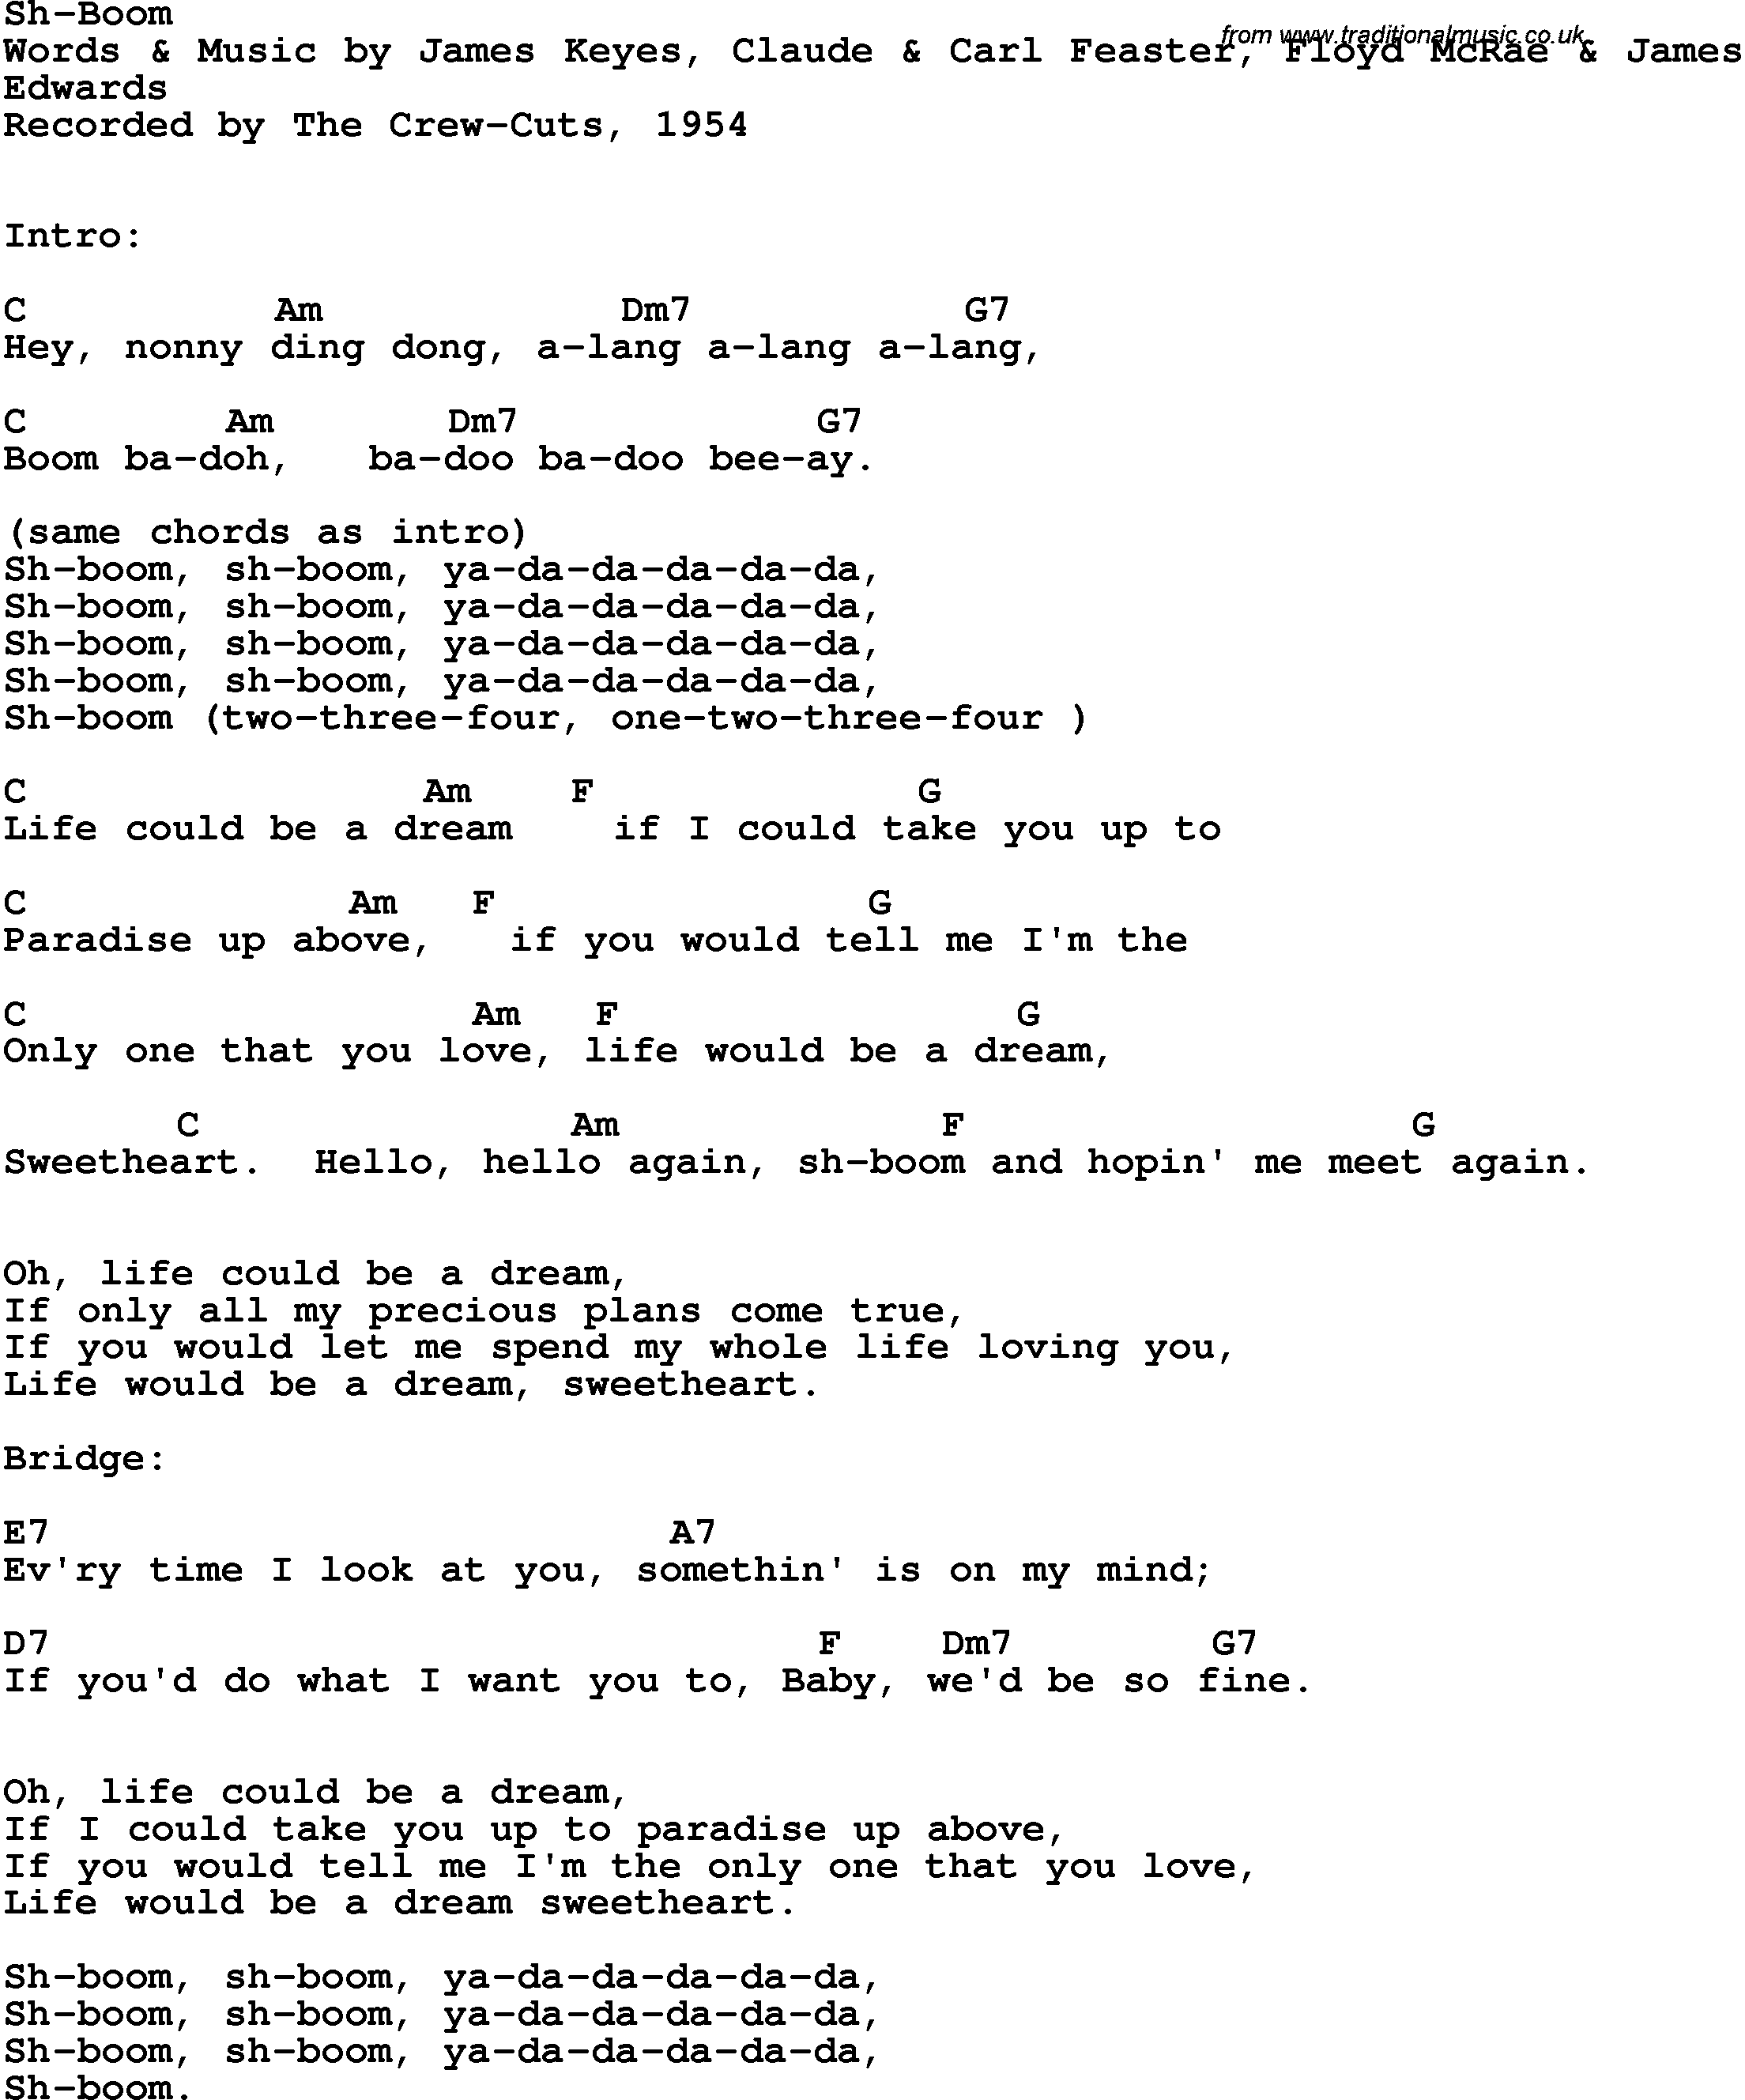 Song Lyrics with guitar chords for Sh-boom - The Crew Cuts, 1954